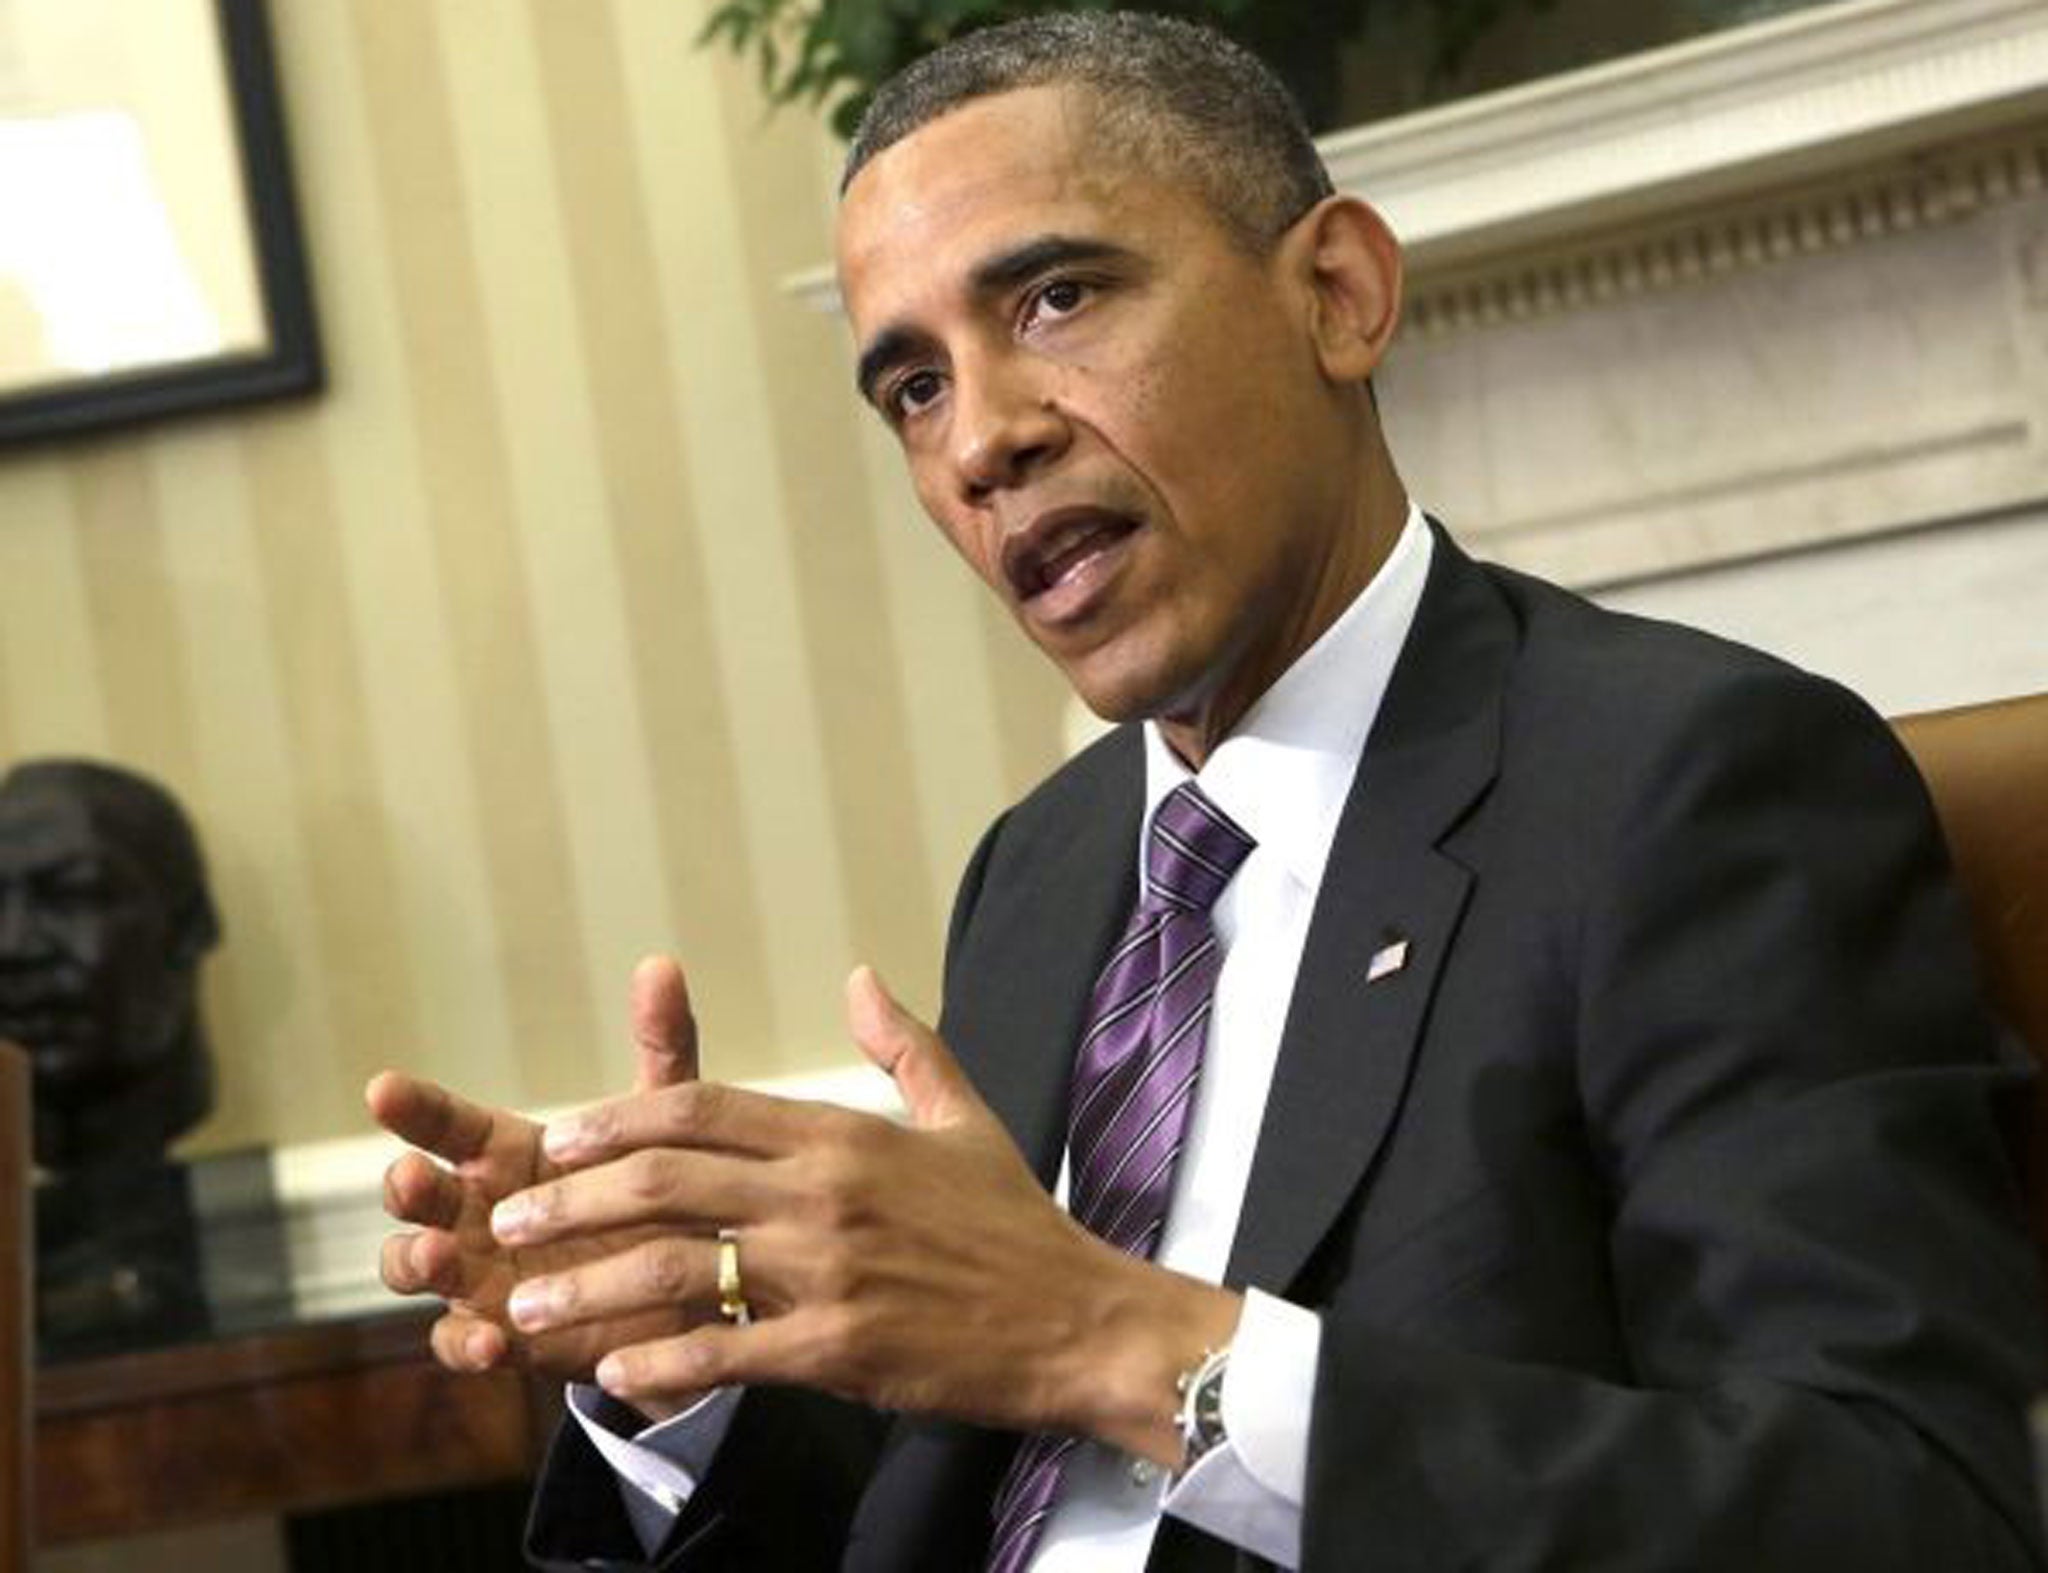 President Obama insists alleged Syrian chemical attacks would still be a 'red line'